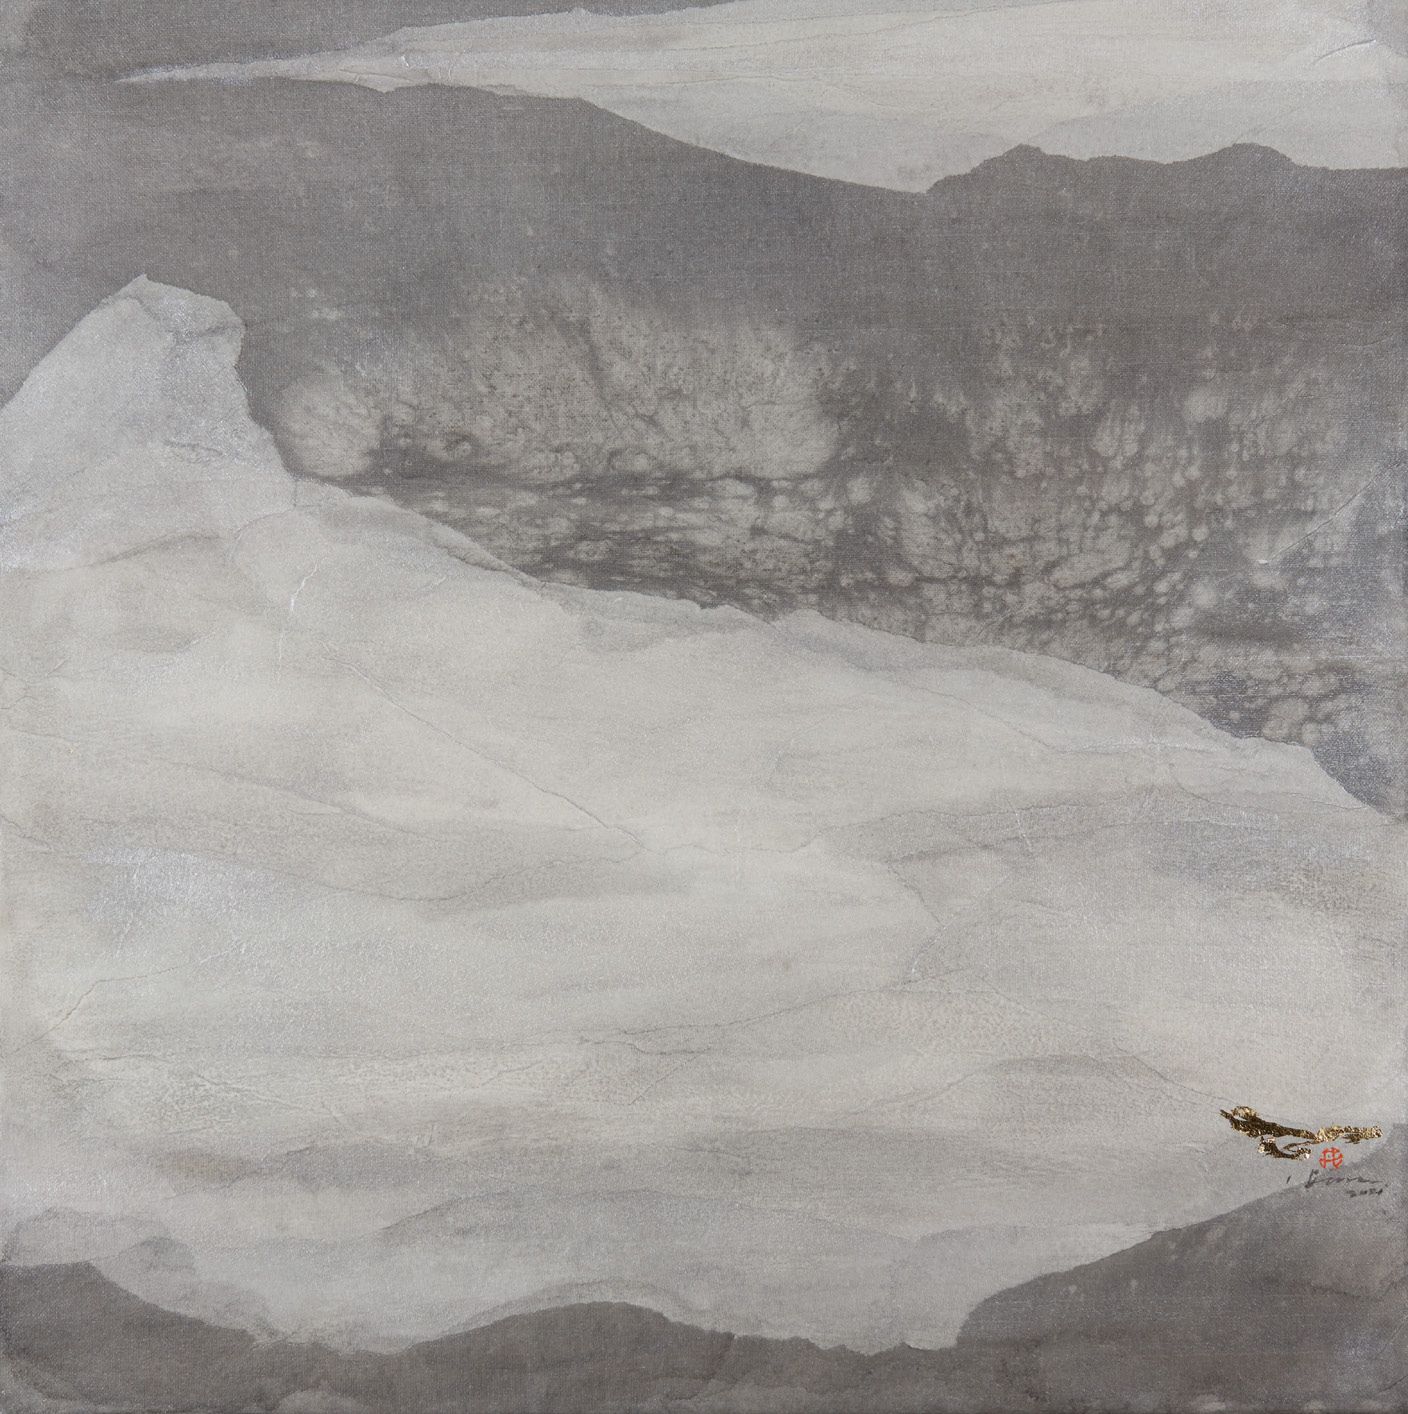 AN XIAOTONG (1971) Figuration
Ink on paper mounted on canvas
60 x 60 cm